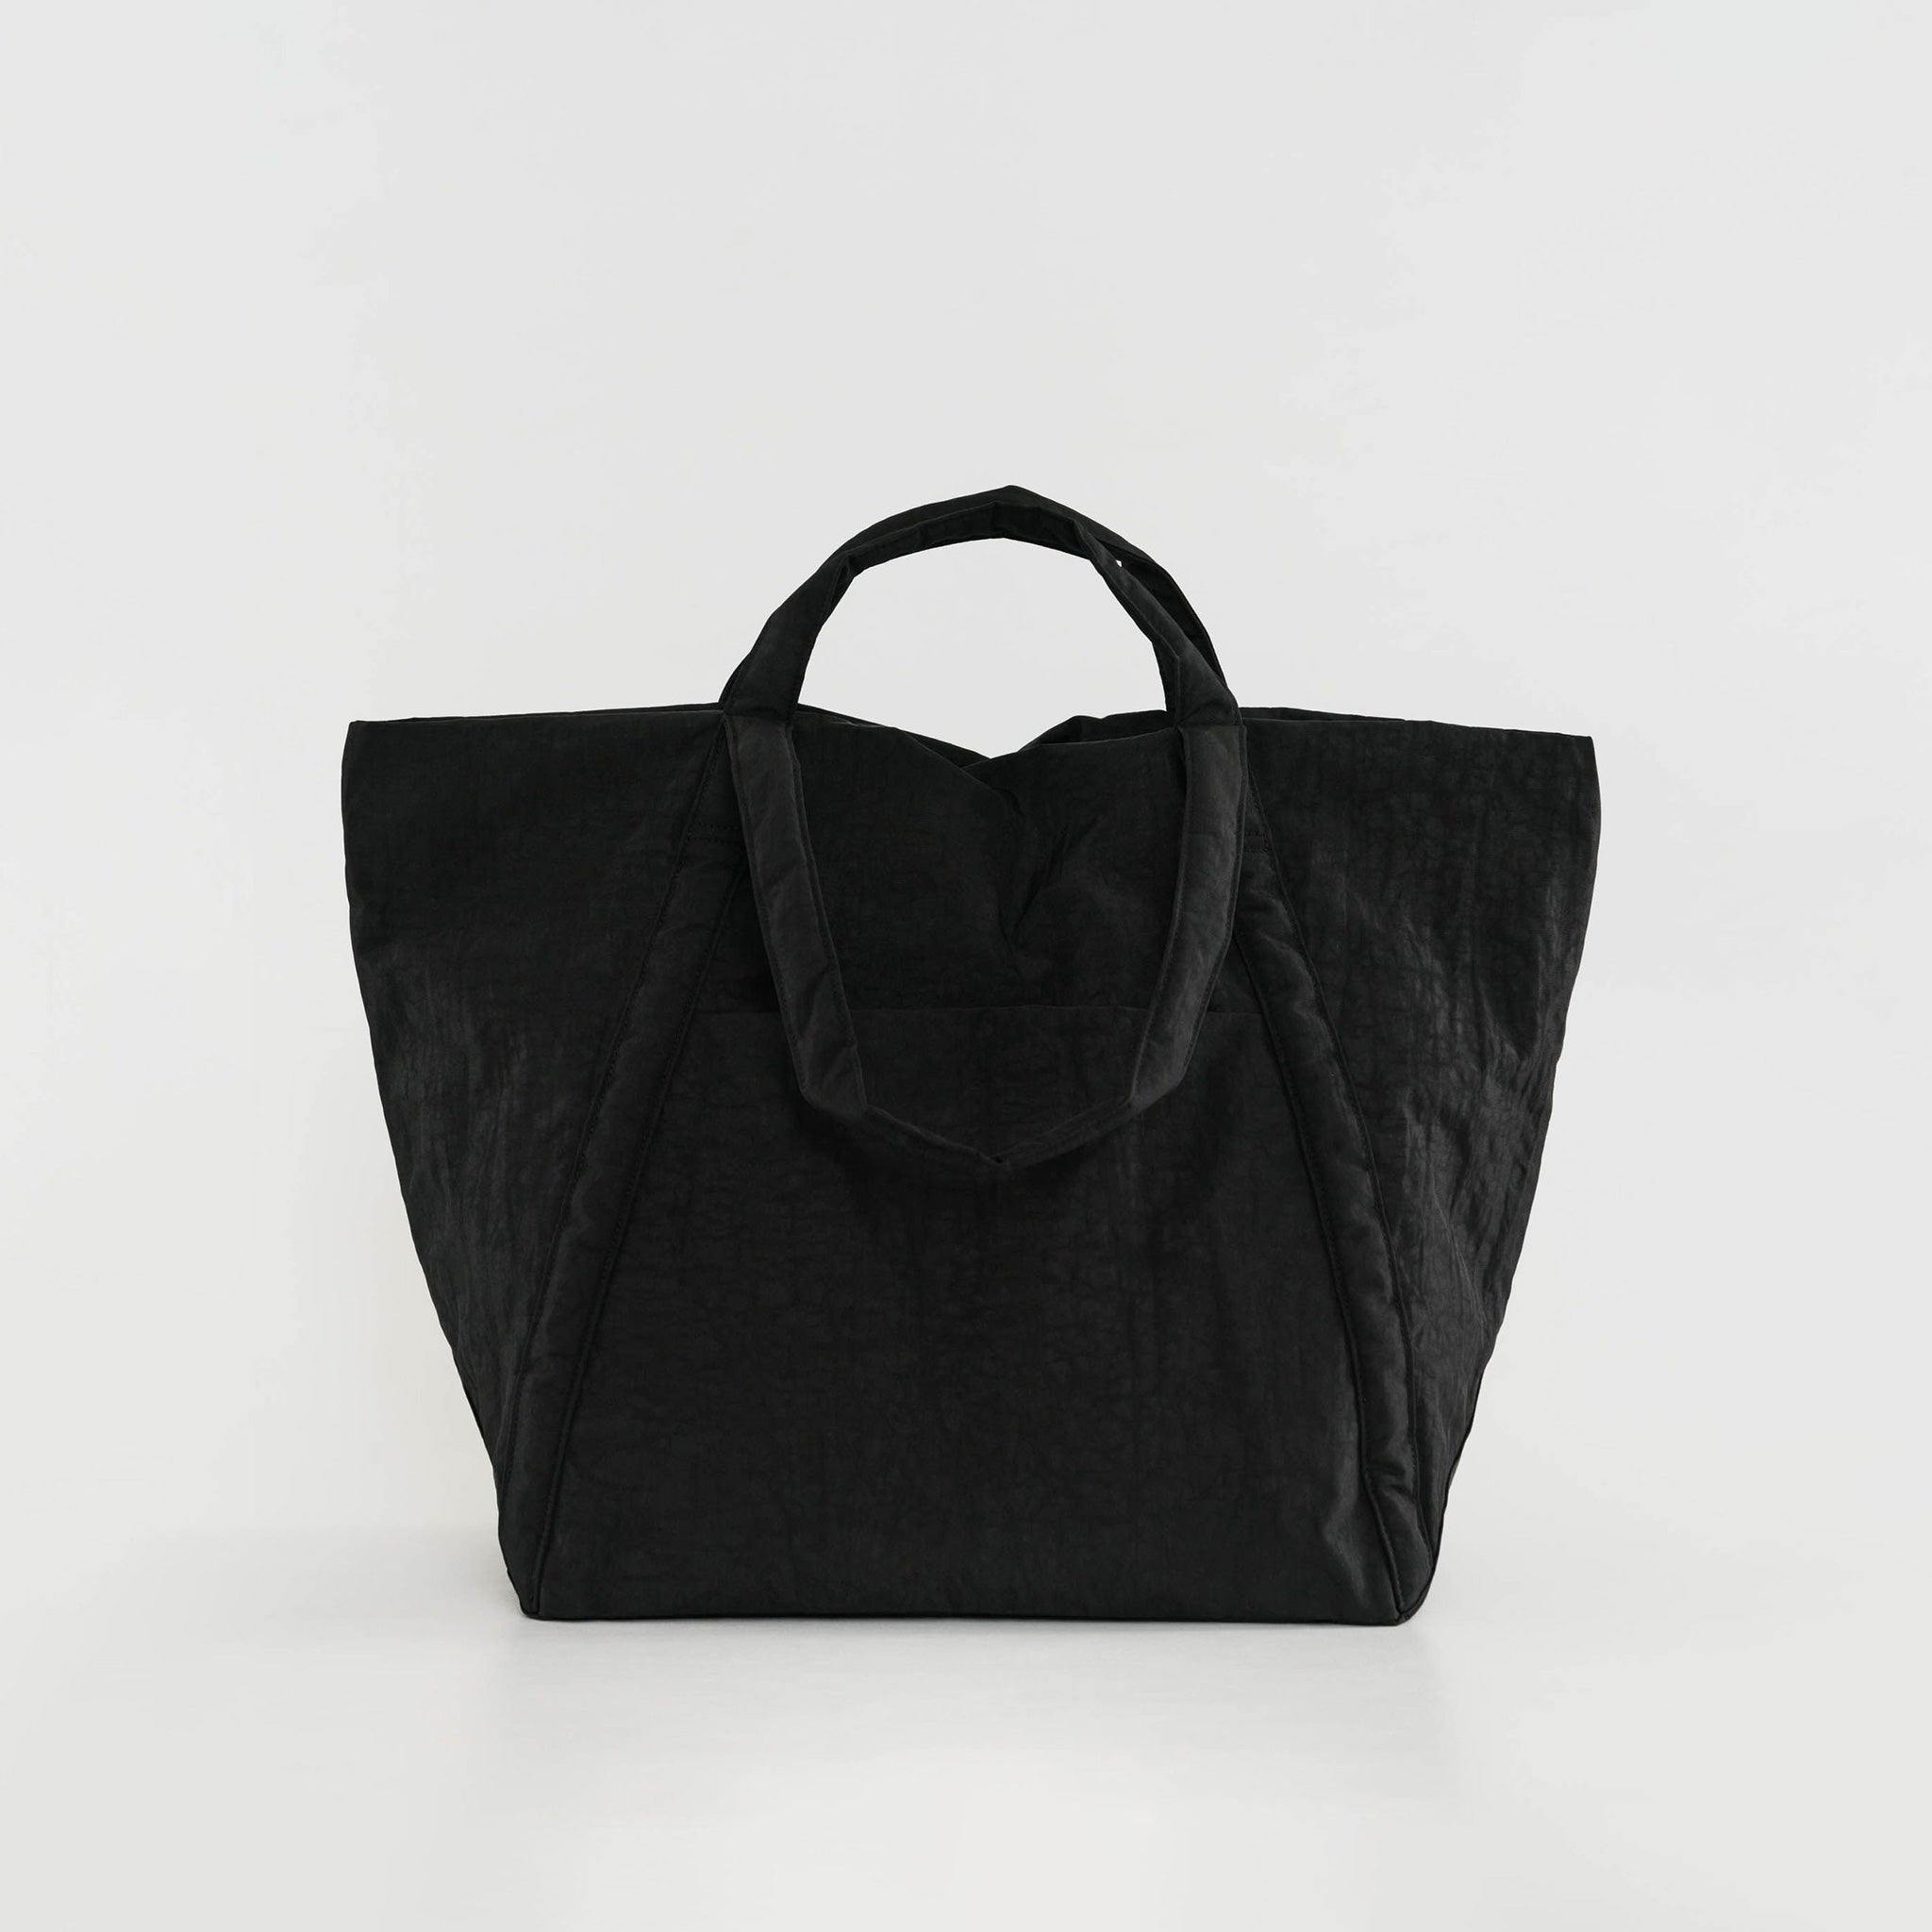 A large trapezoidal black nylon tote bag meant for traveling, fabricated in a puffy crinkly fabric, shown standing up.